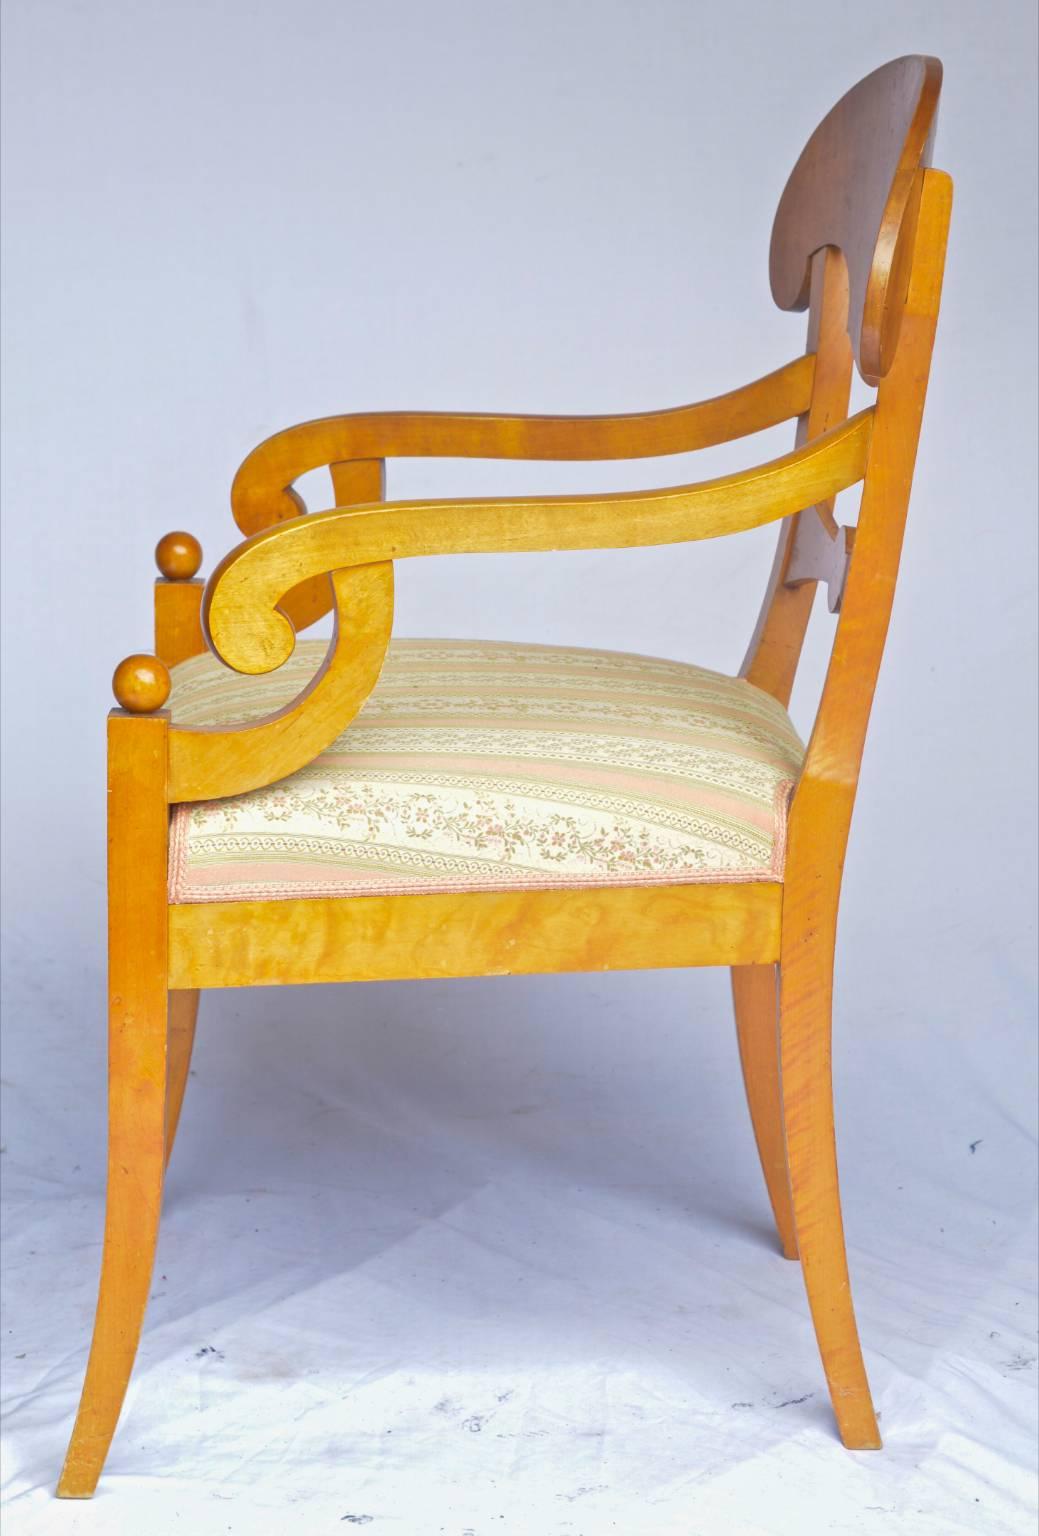 Polished Antique Biedermeier Empire Swedish Carver Chairs in Quilted Golden Birch